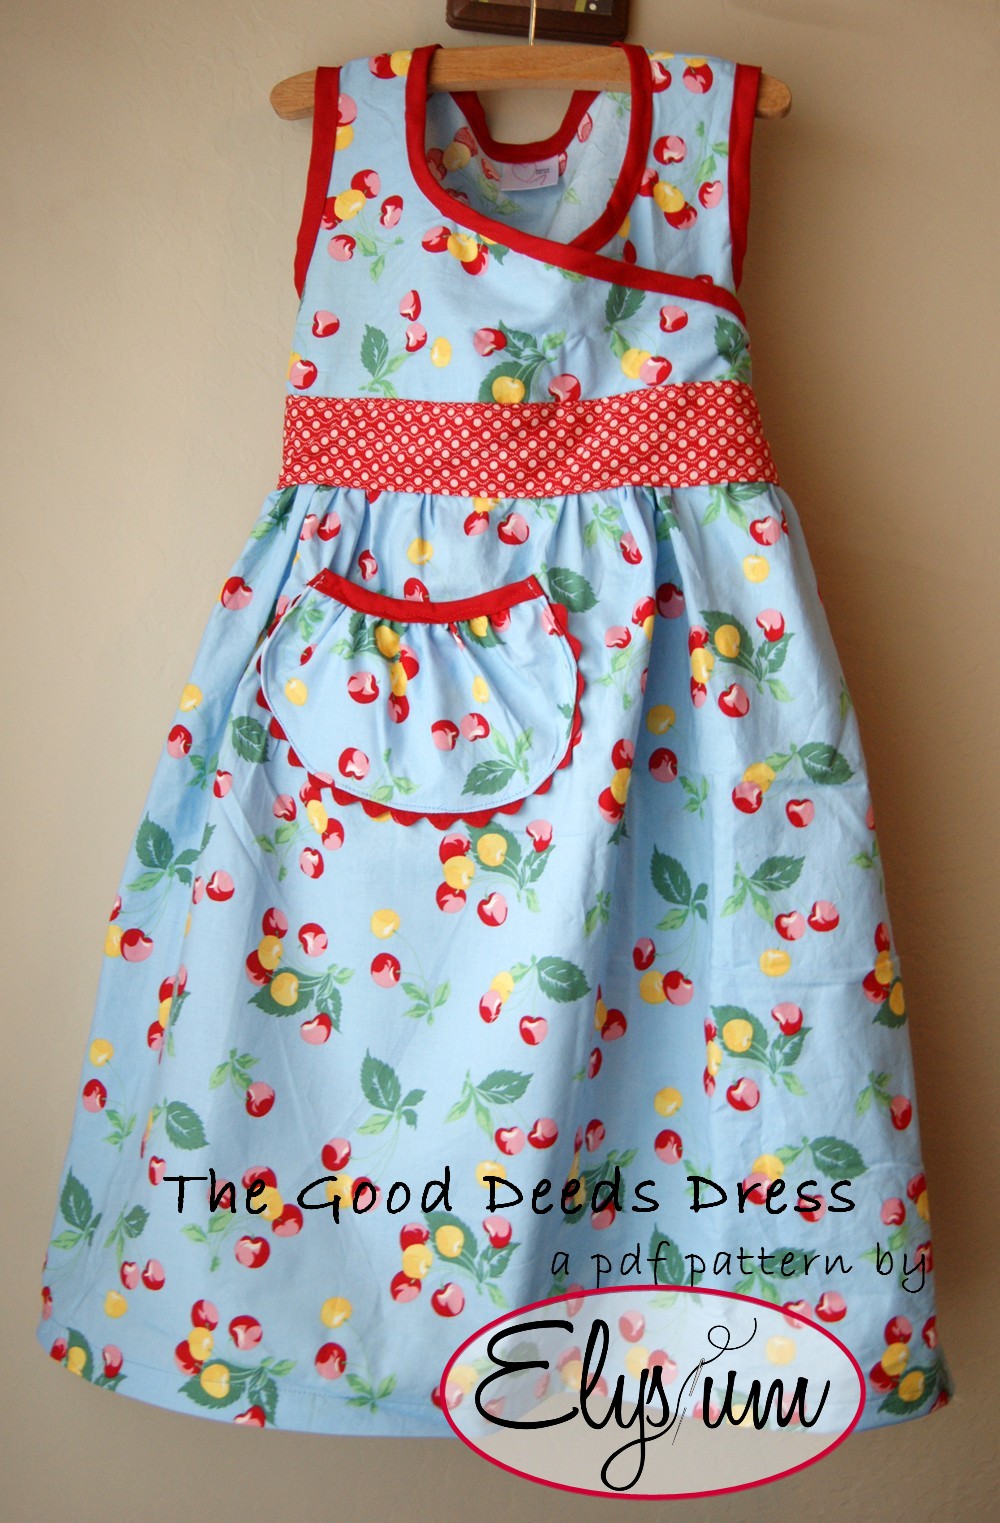 Night Owl's Menagerie: The Good Deeds Dress - A Gift To You To Give